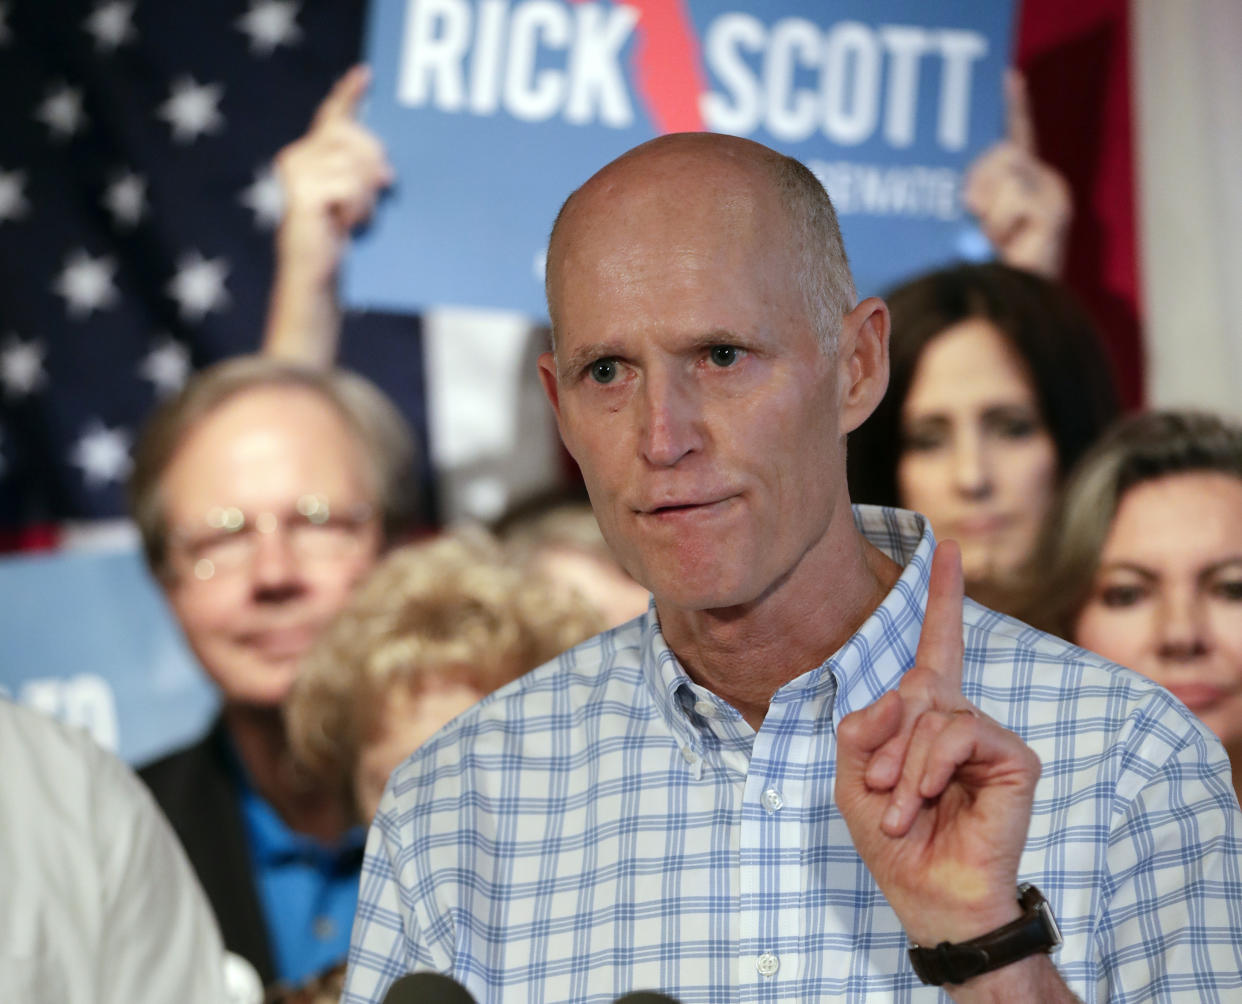 Florida Gov. Rick Scott, who is running to unseat Democratic U.S. Sen. Bill Nelson, at a rally in September. (Photo: John Raoux/AP)